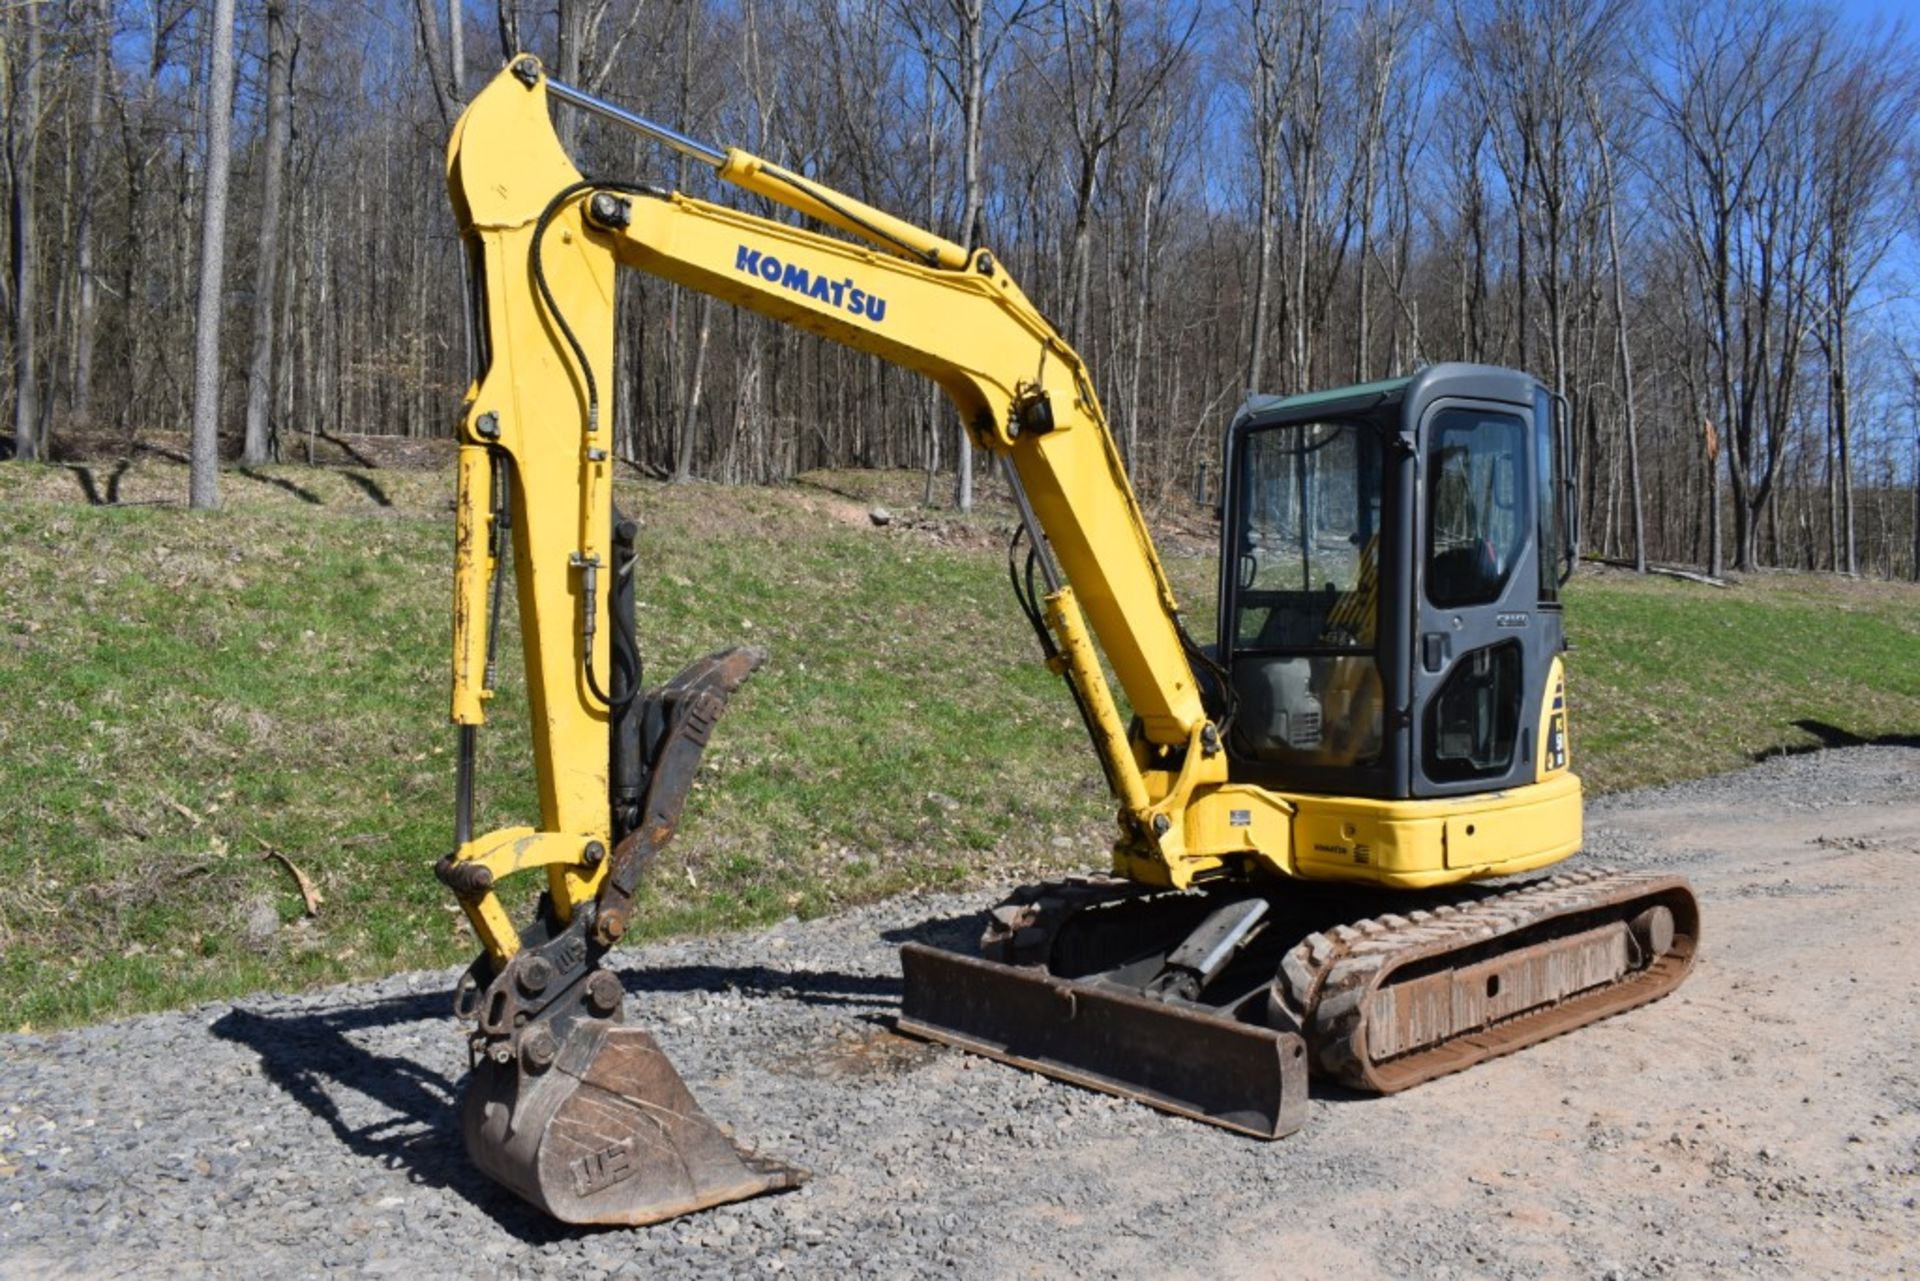 Komatsu PC50MR-2 Excavator 6643 Hours, Runs and Operates, WB 24" Bucket, WB Quick Coupler, Auxiliary